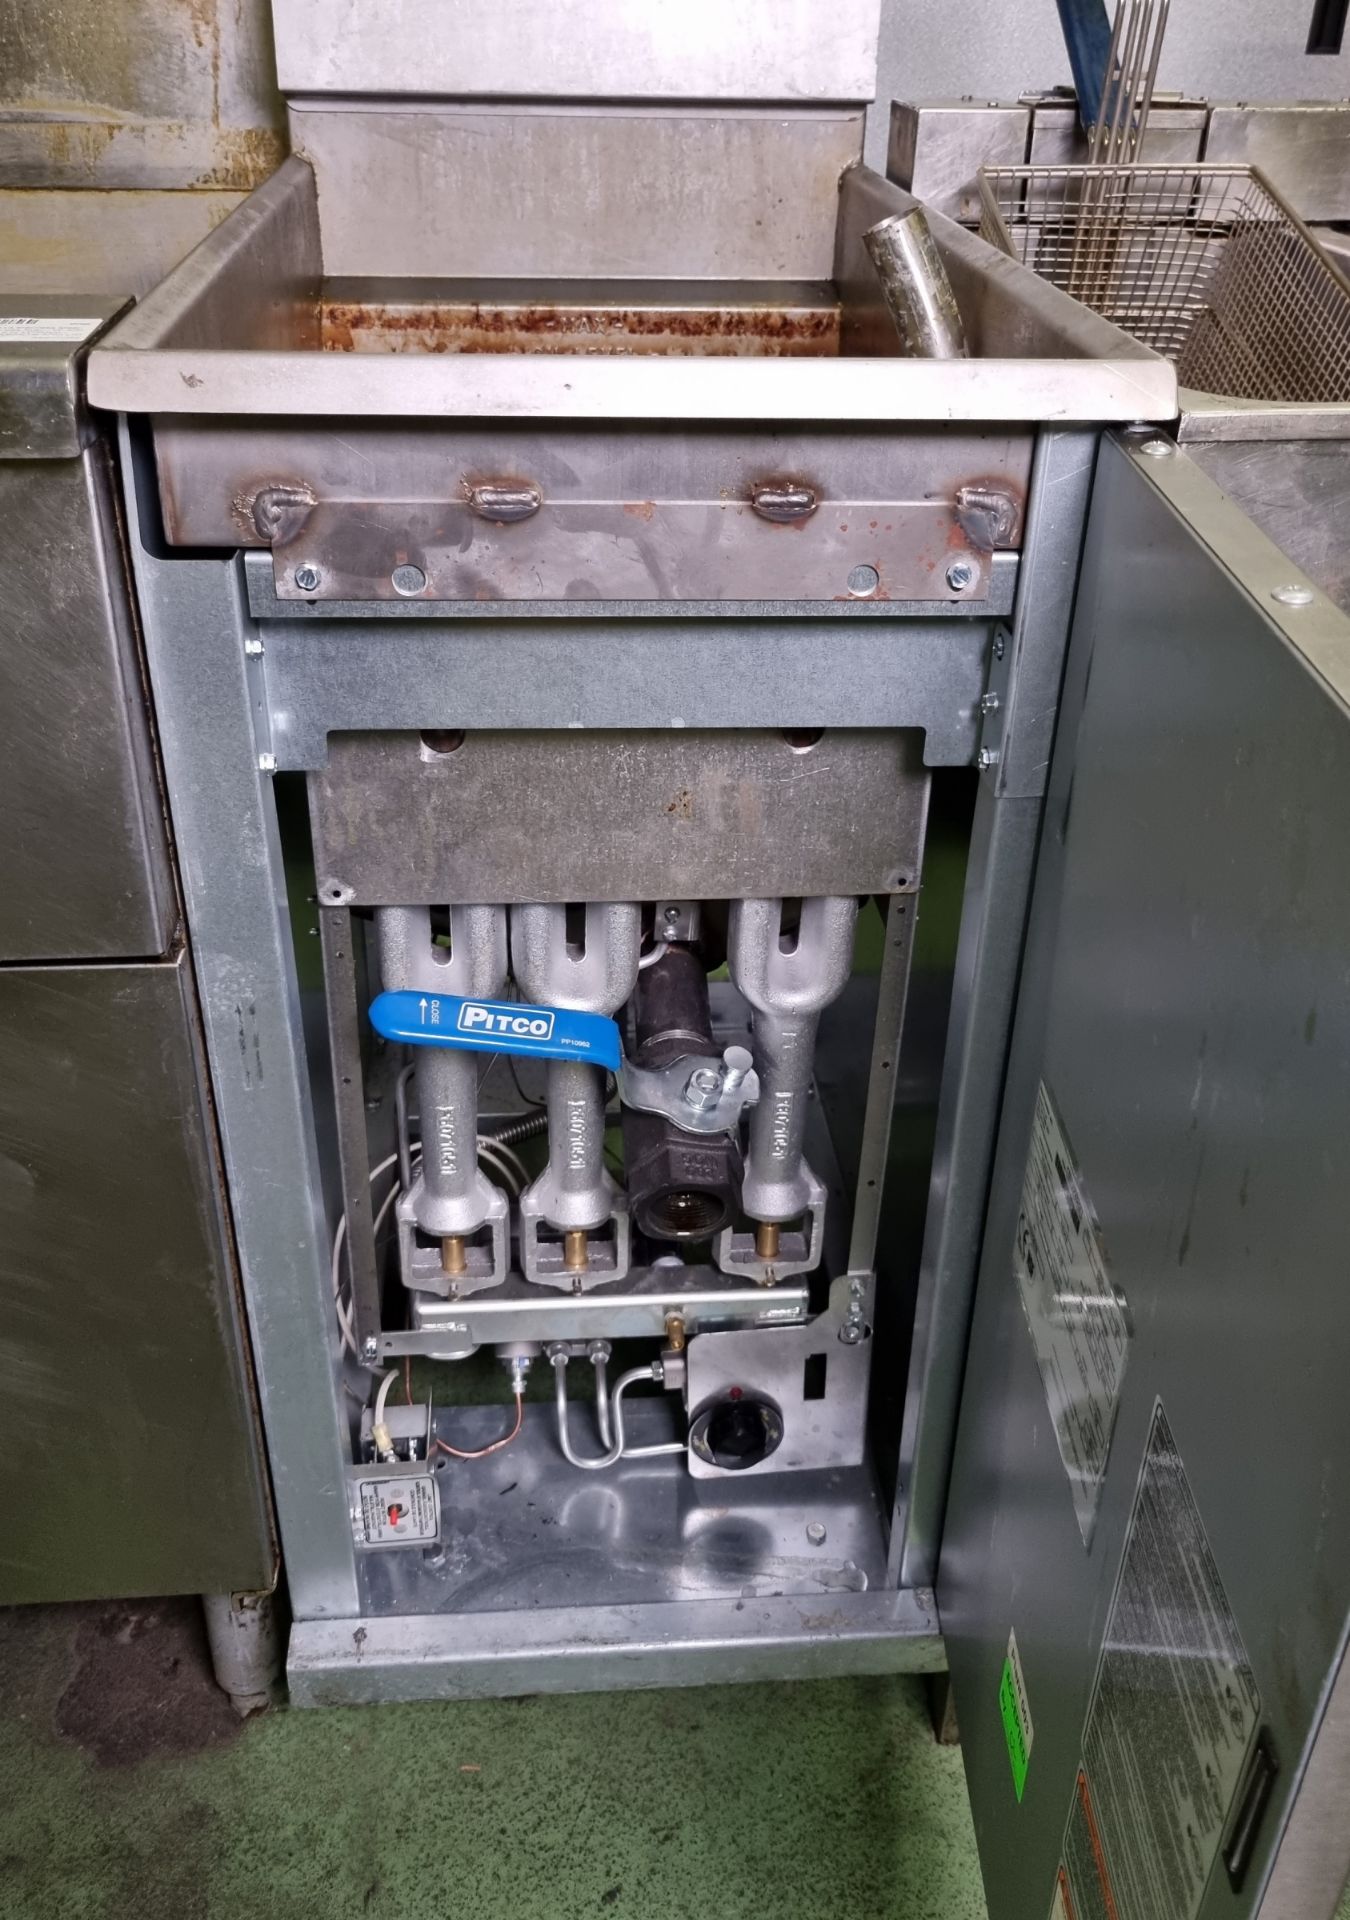 Pitco 35C+ stainless steel single tank gas fryer - W 400 x D 800 x H 1170mm - MISSING BASKETS - Image 4 of 5